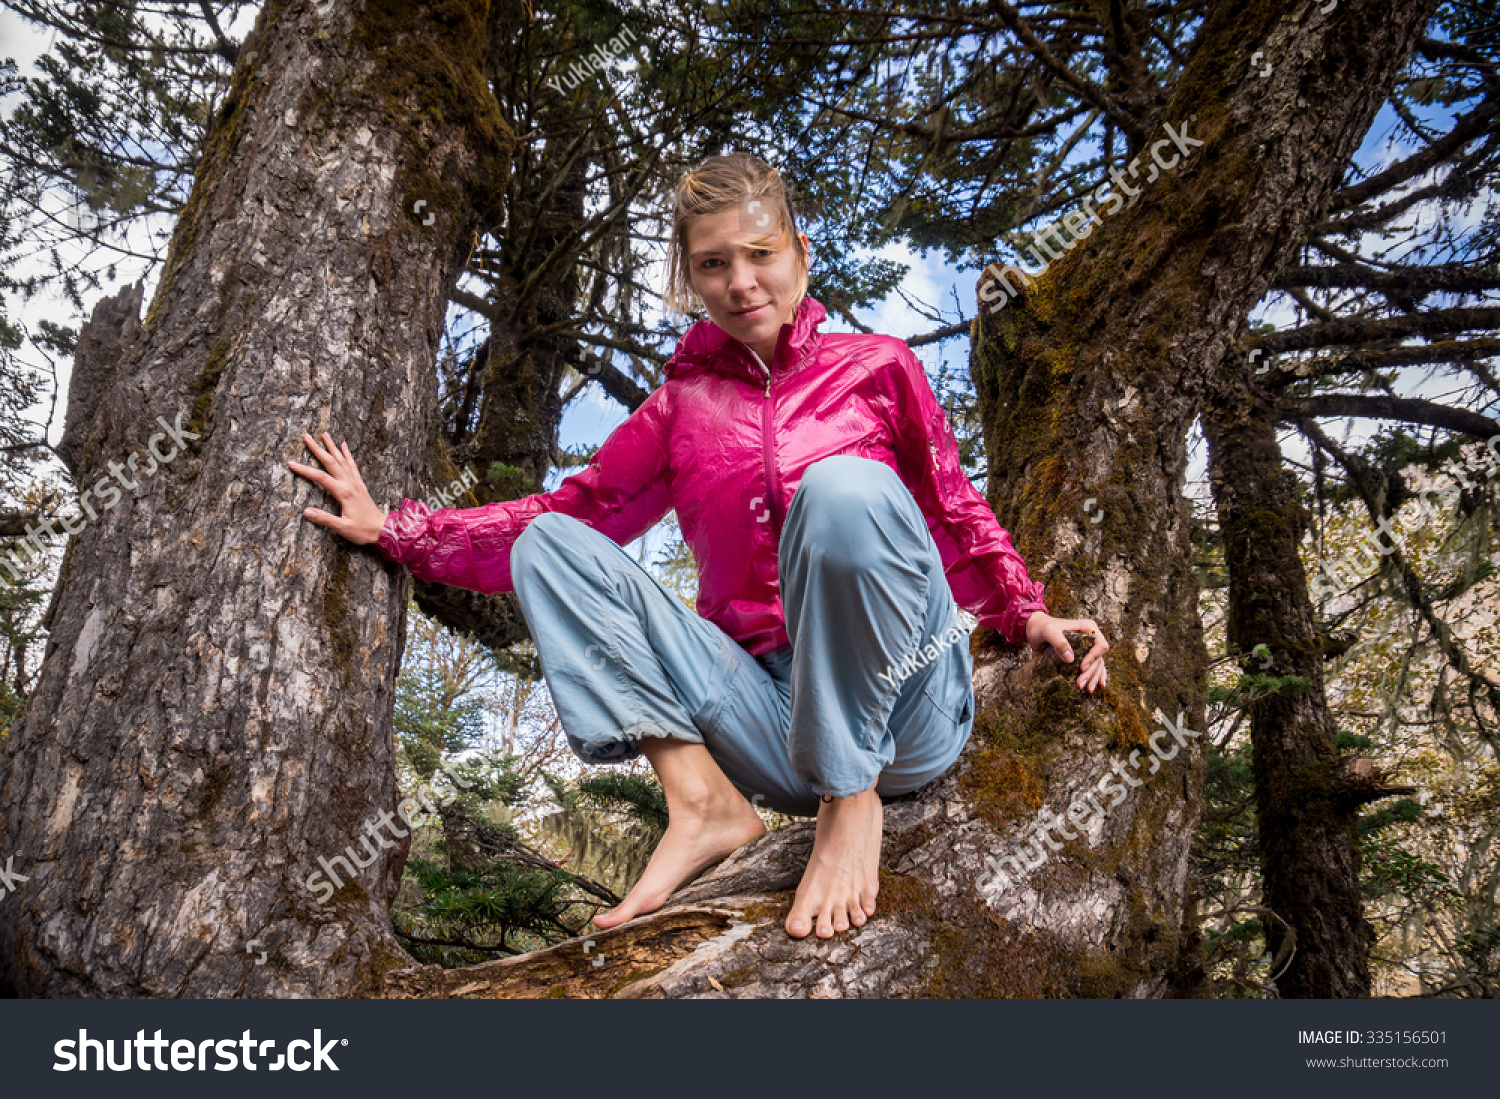 https://image.shutterstock.com/shutterstock/photos/335156501/display_1500/stock-photo-a-young-girl-with-bare-feet-sitting-on-a-tree-branch-335156501.jpg